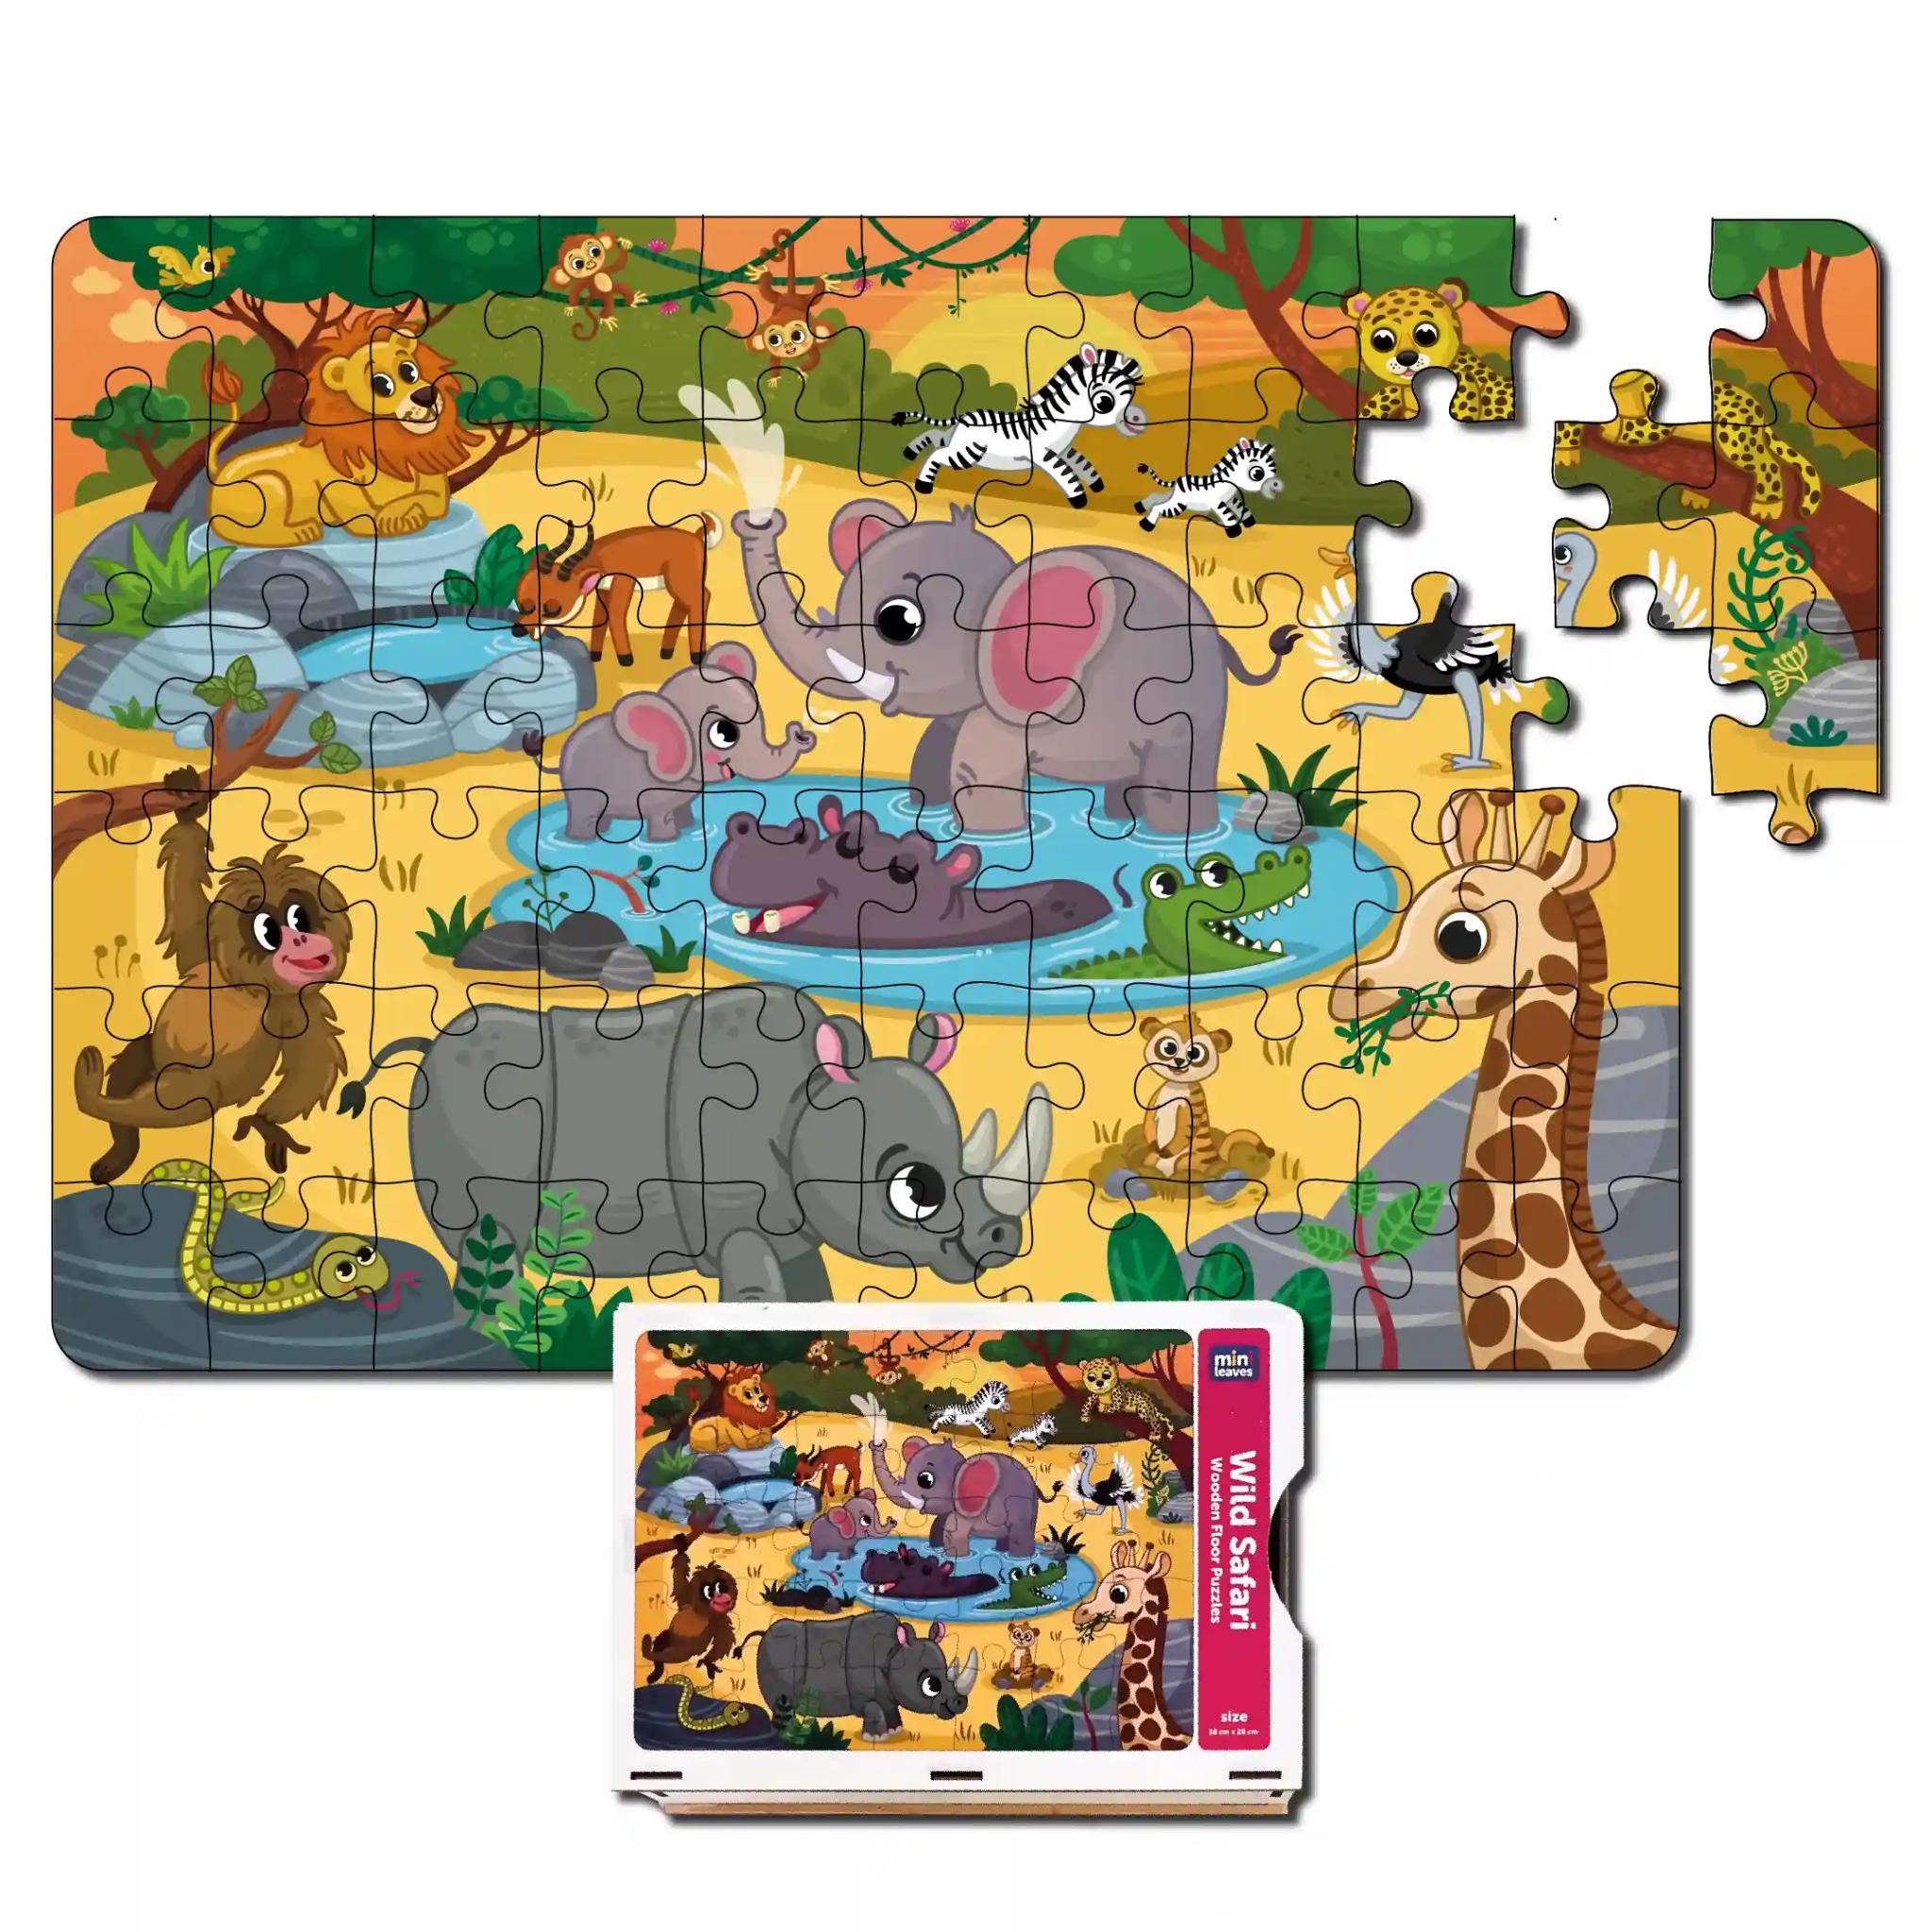 Mini Leaves Wild Safari Animals 60 Pieces Wooden Jigsaw Floor Puzzle with Wooden Box